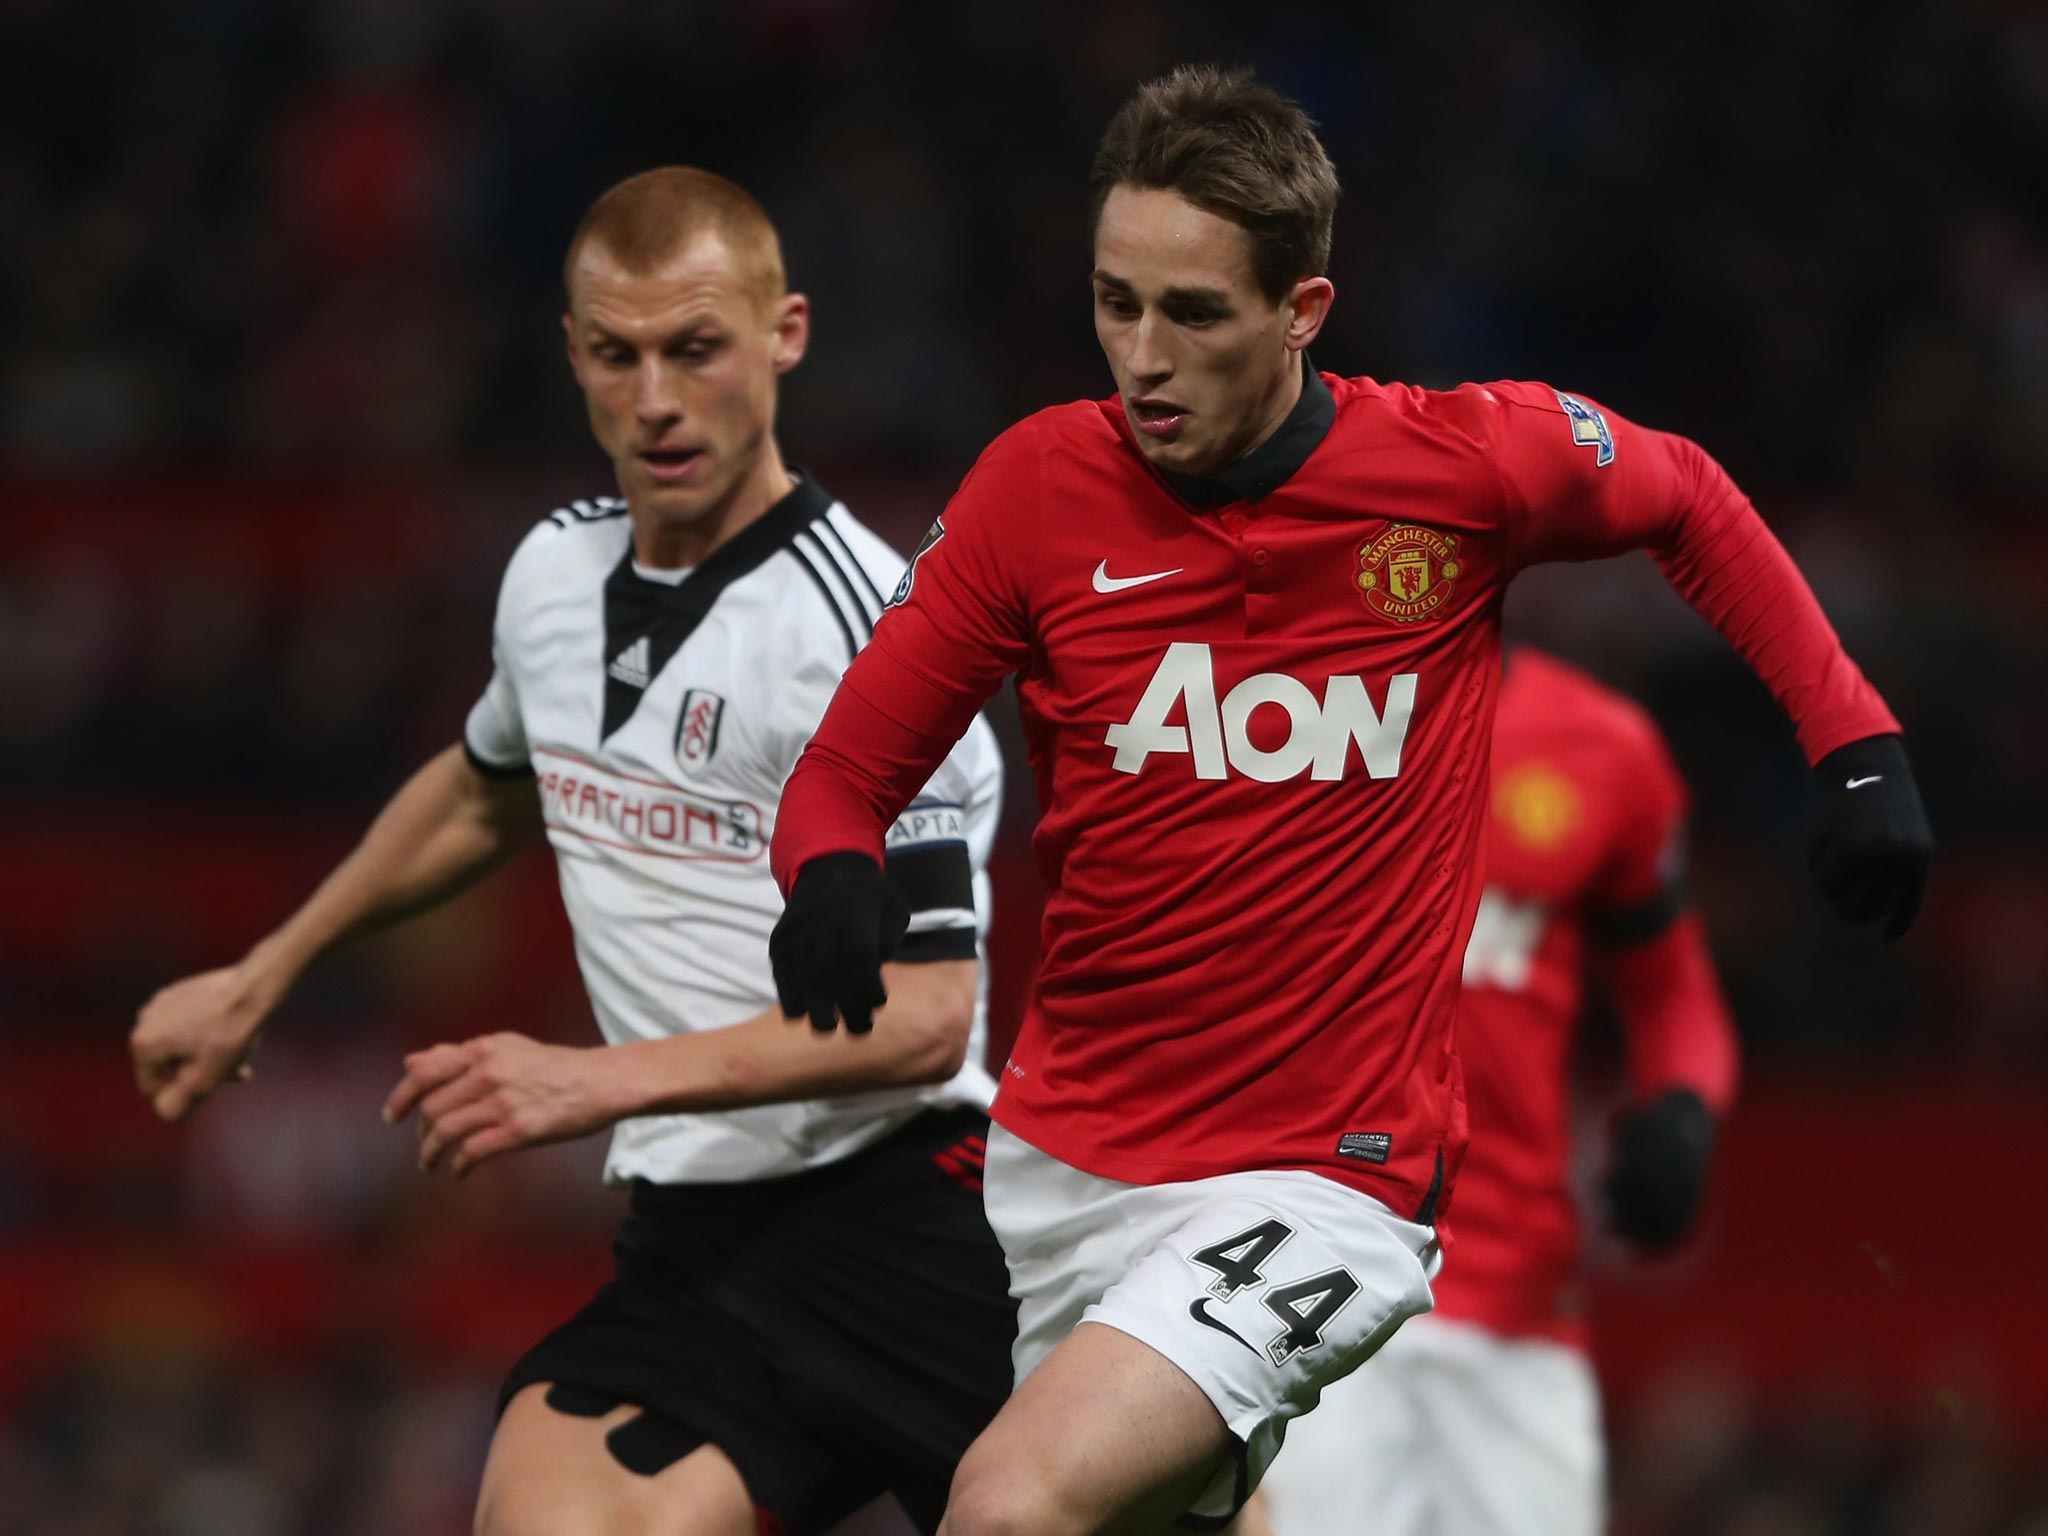 Adnan Januzaj could qualify to represent England in 2017 under Fifa’s residency rule